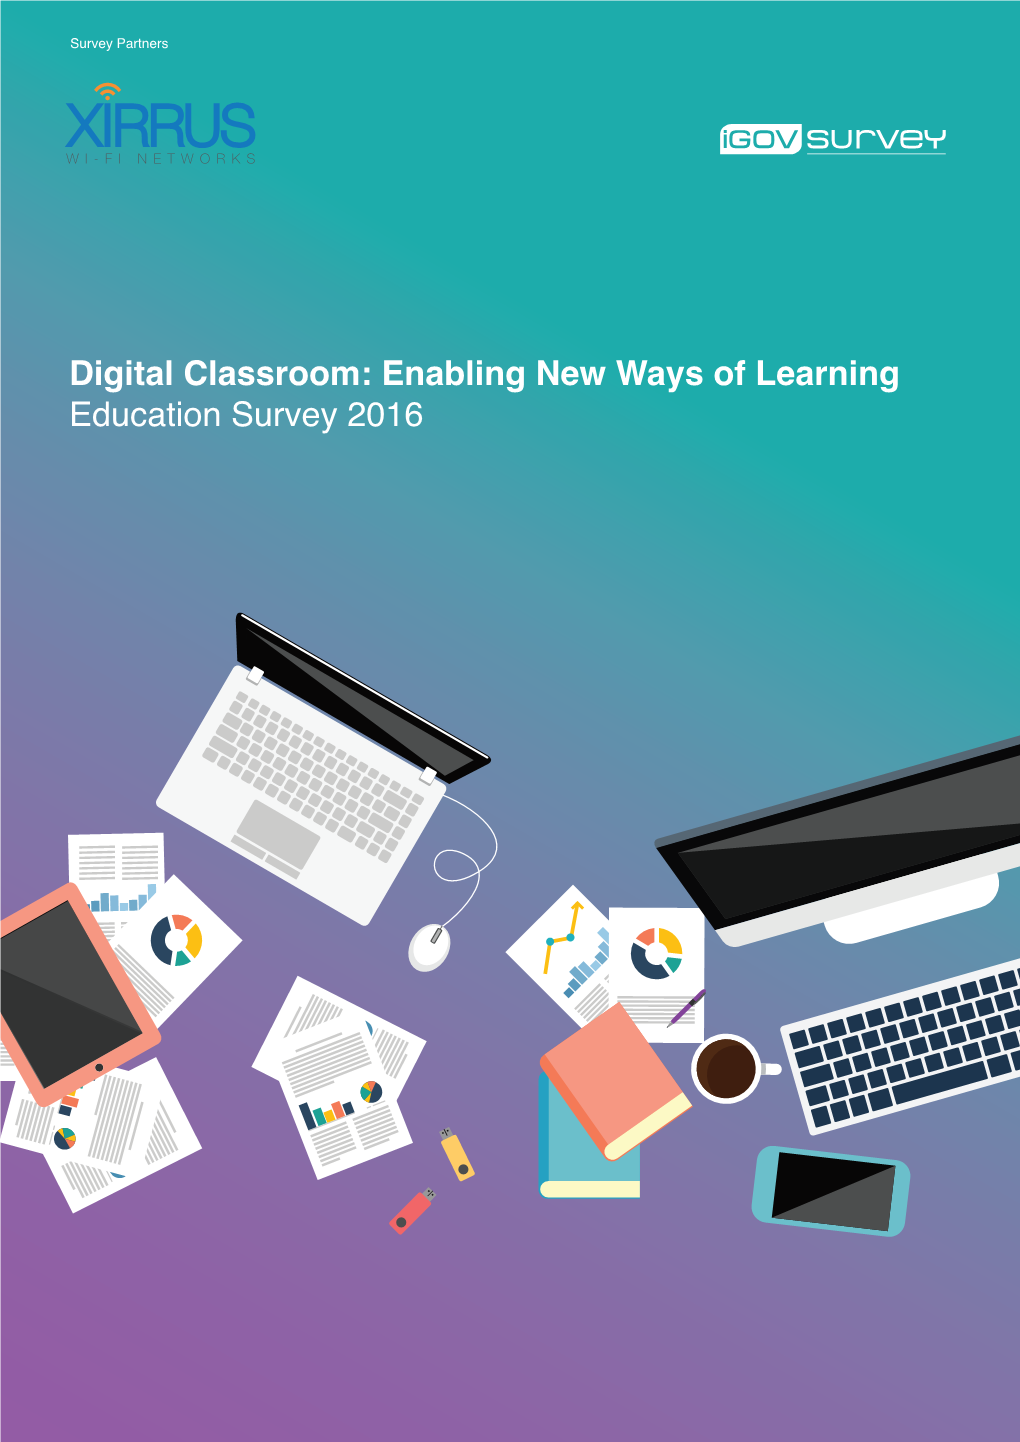 Digital Classroom: Enabling New Ways of Learning Education Survey 2016 Contents